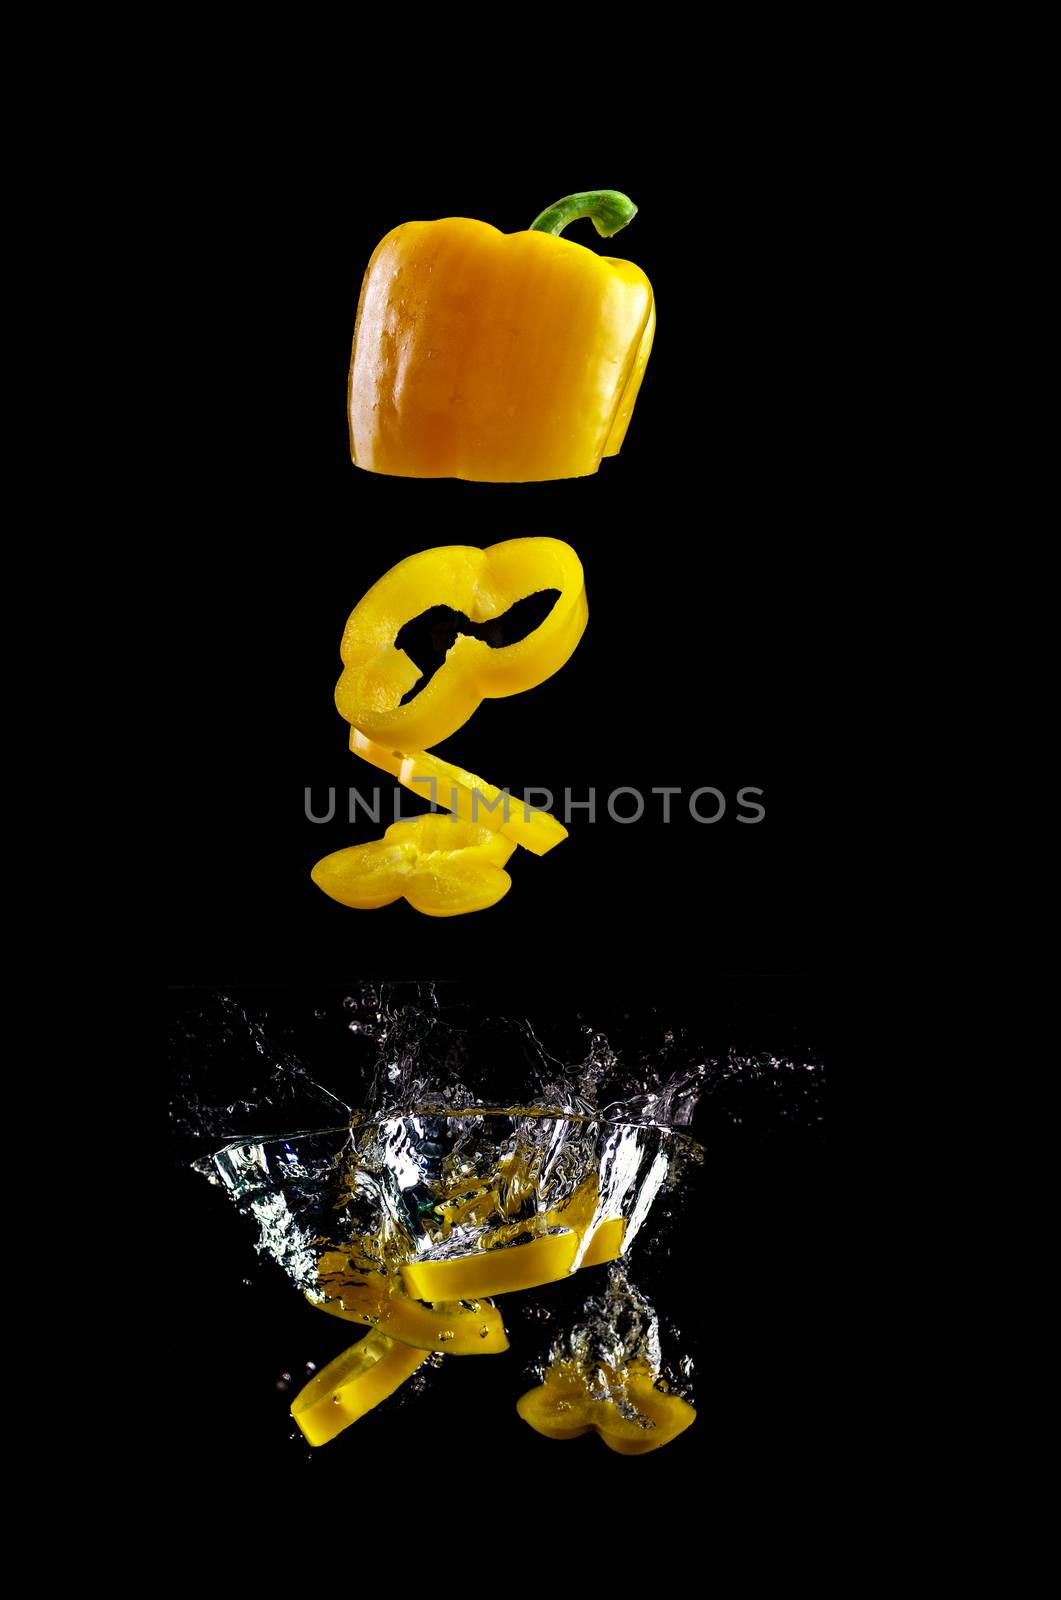 Tomato, two types of paprika and eggplant slices fall into water, on black background